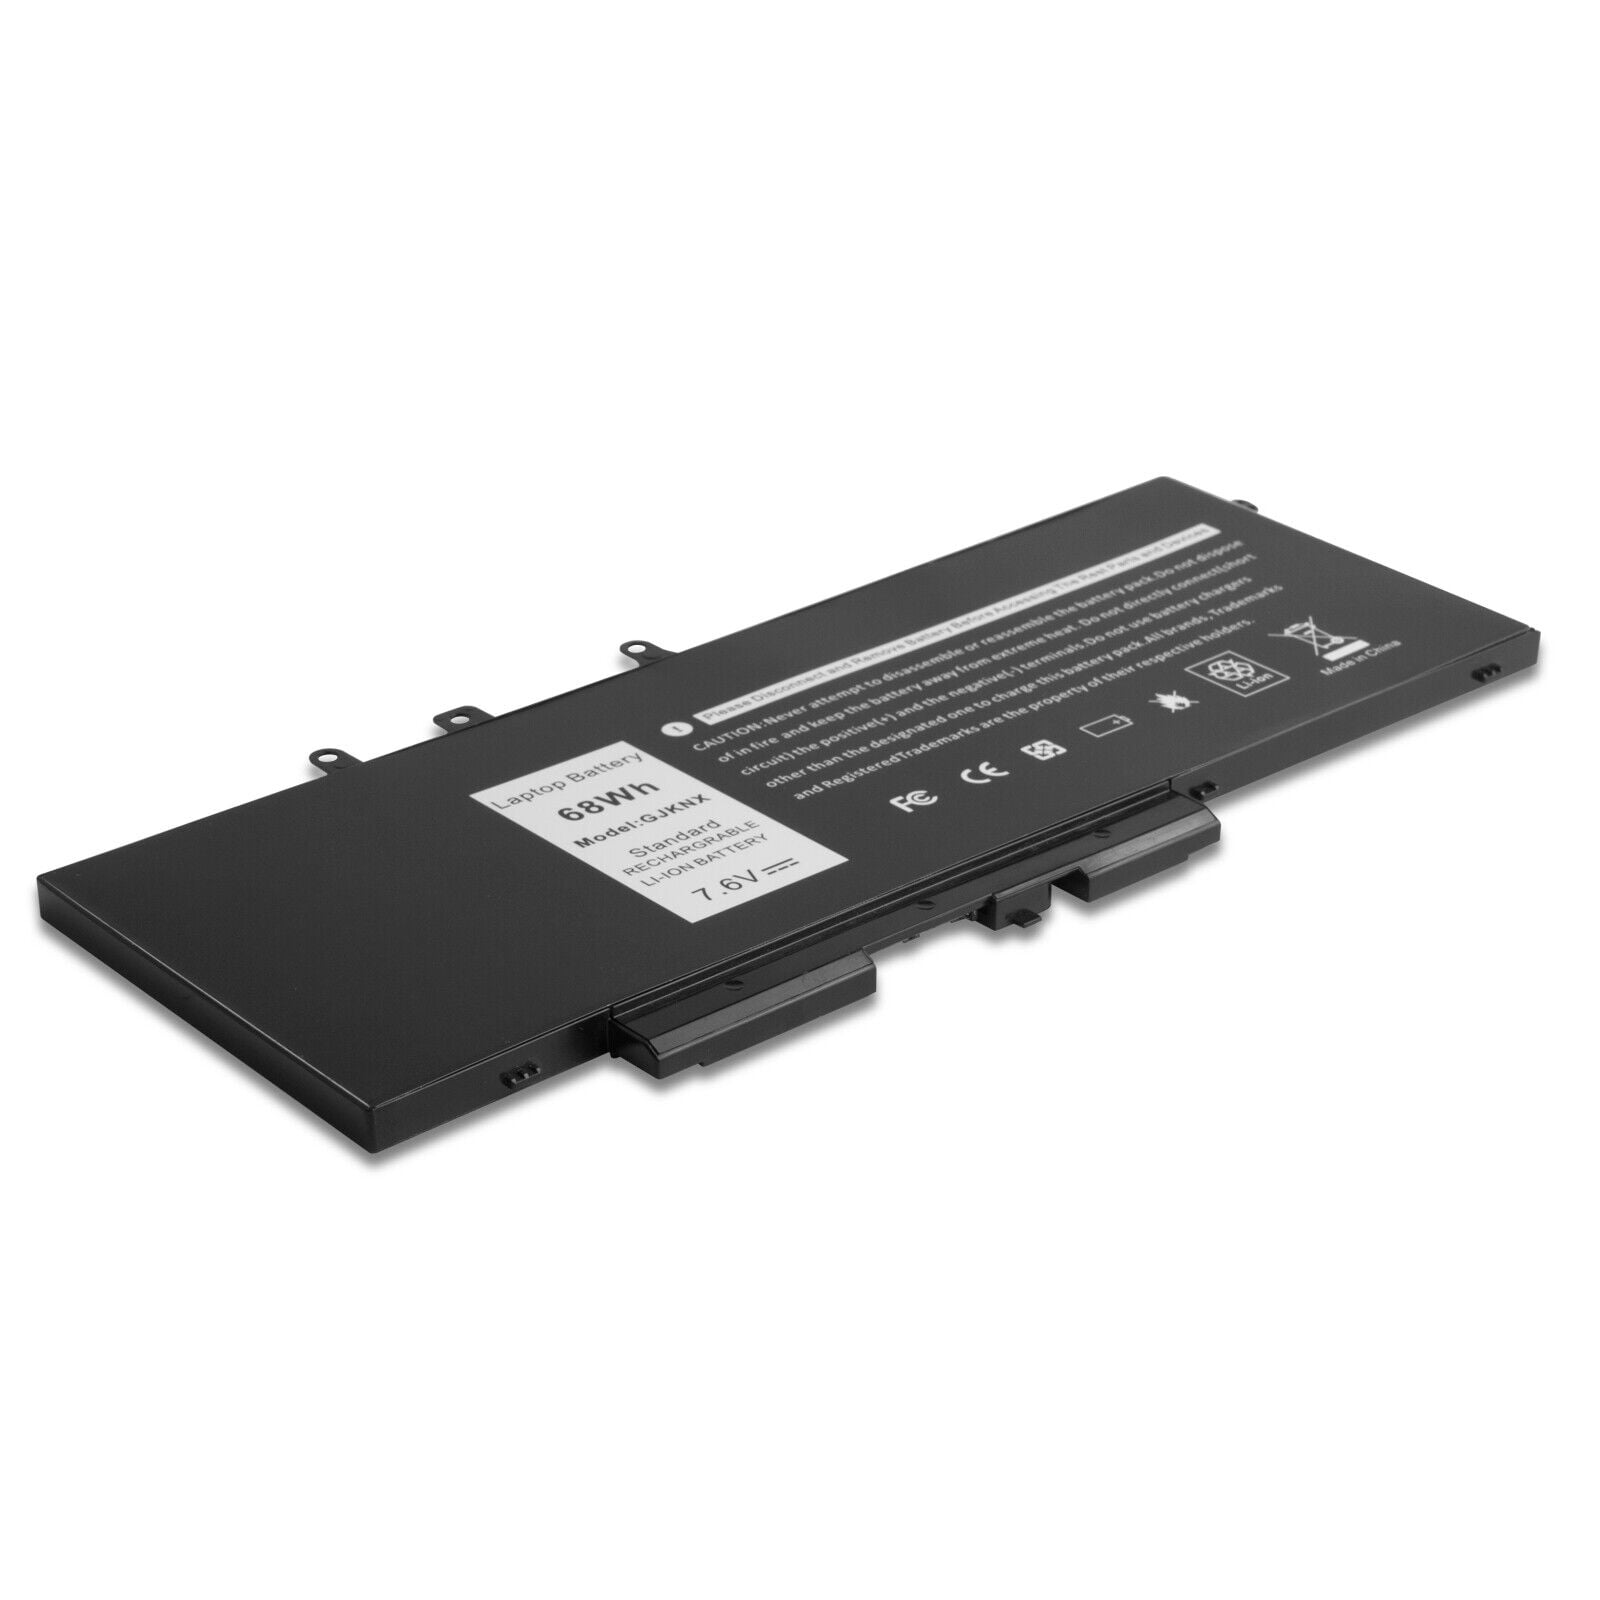 DY9NT, 0DY9NT, 5YHR4 Laptop Battery For Dell Latitude 5480 5580 5280 5490  5491 5580 5590 5591 